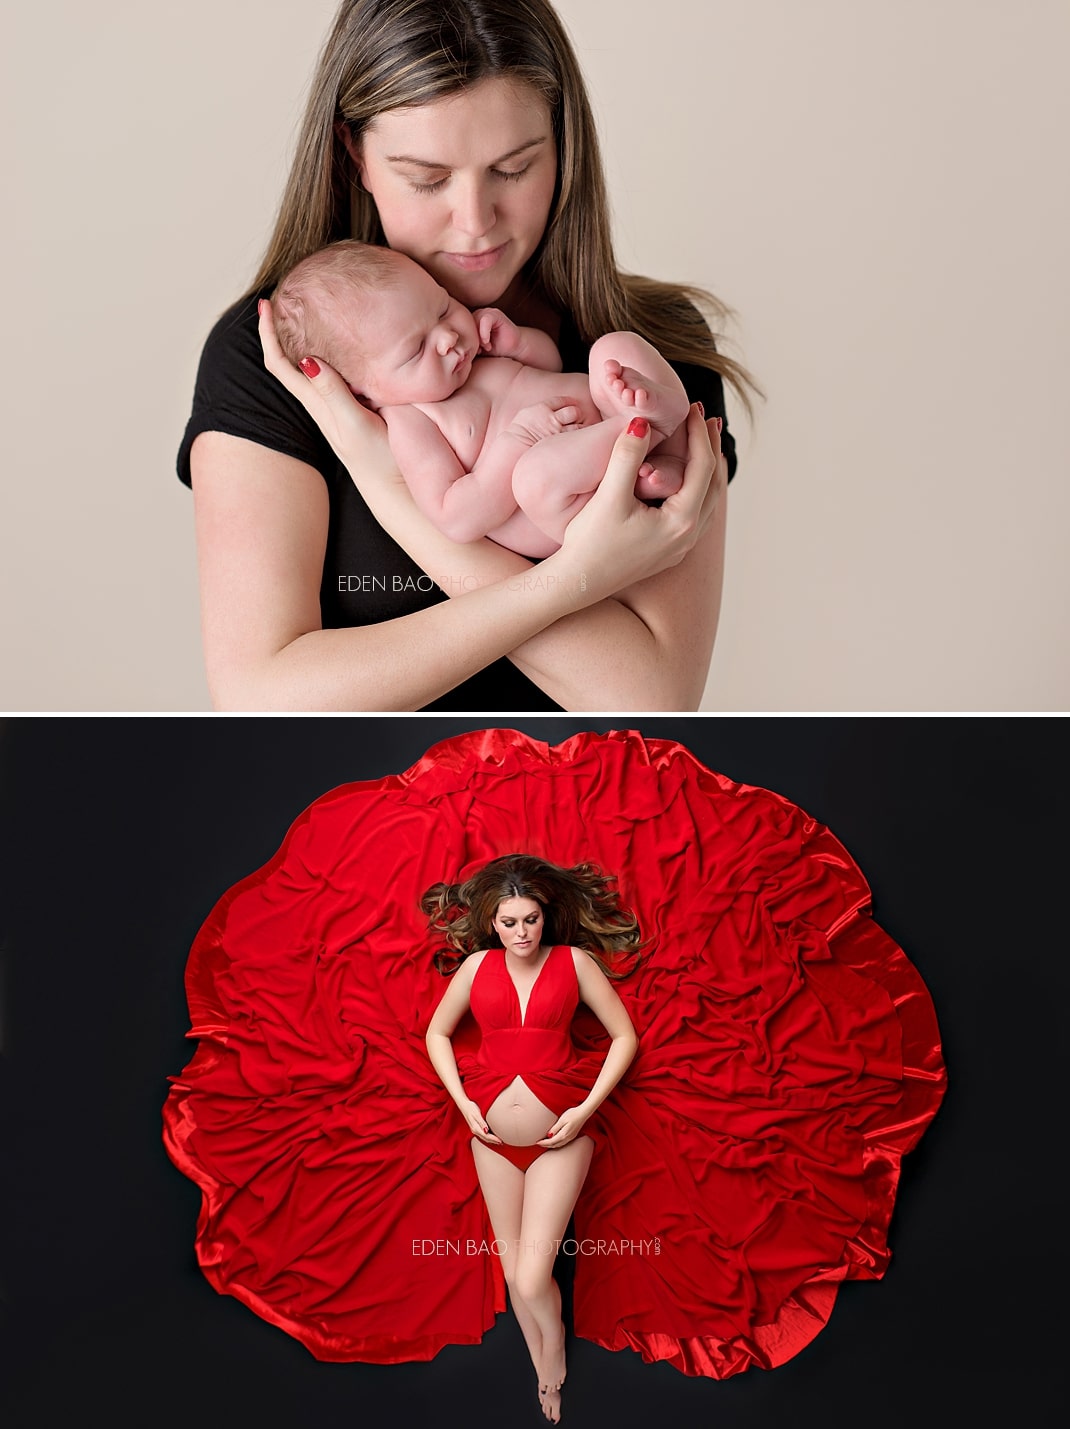 Professional makeup and hair. How to look beautiful for your maternity photo shoot